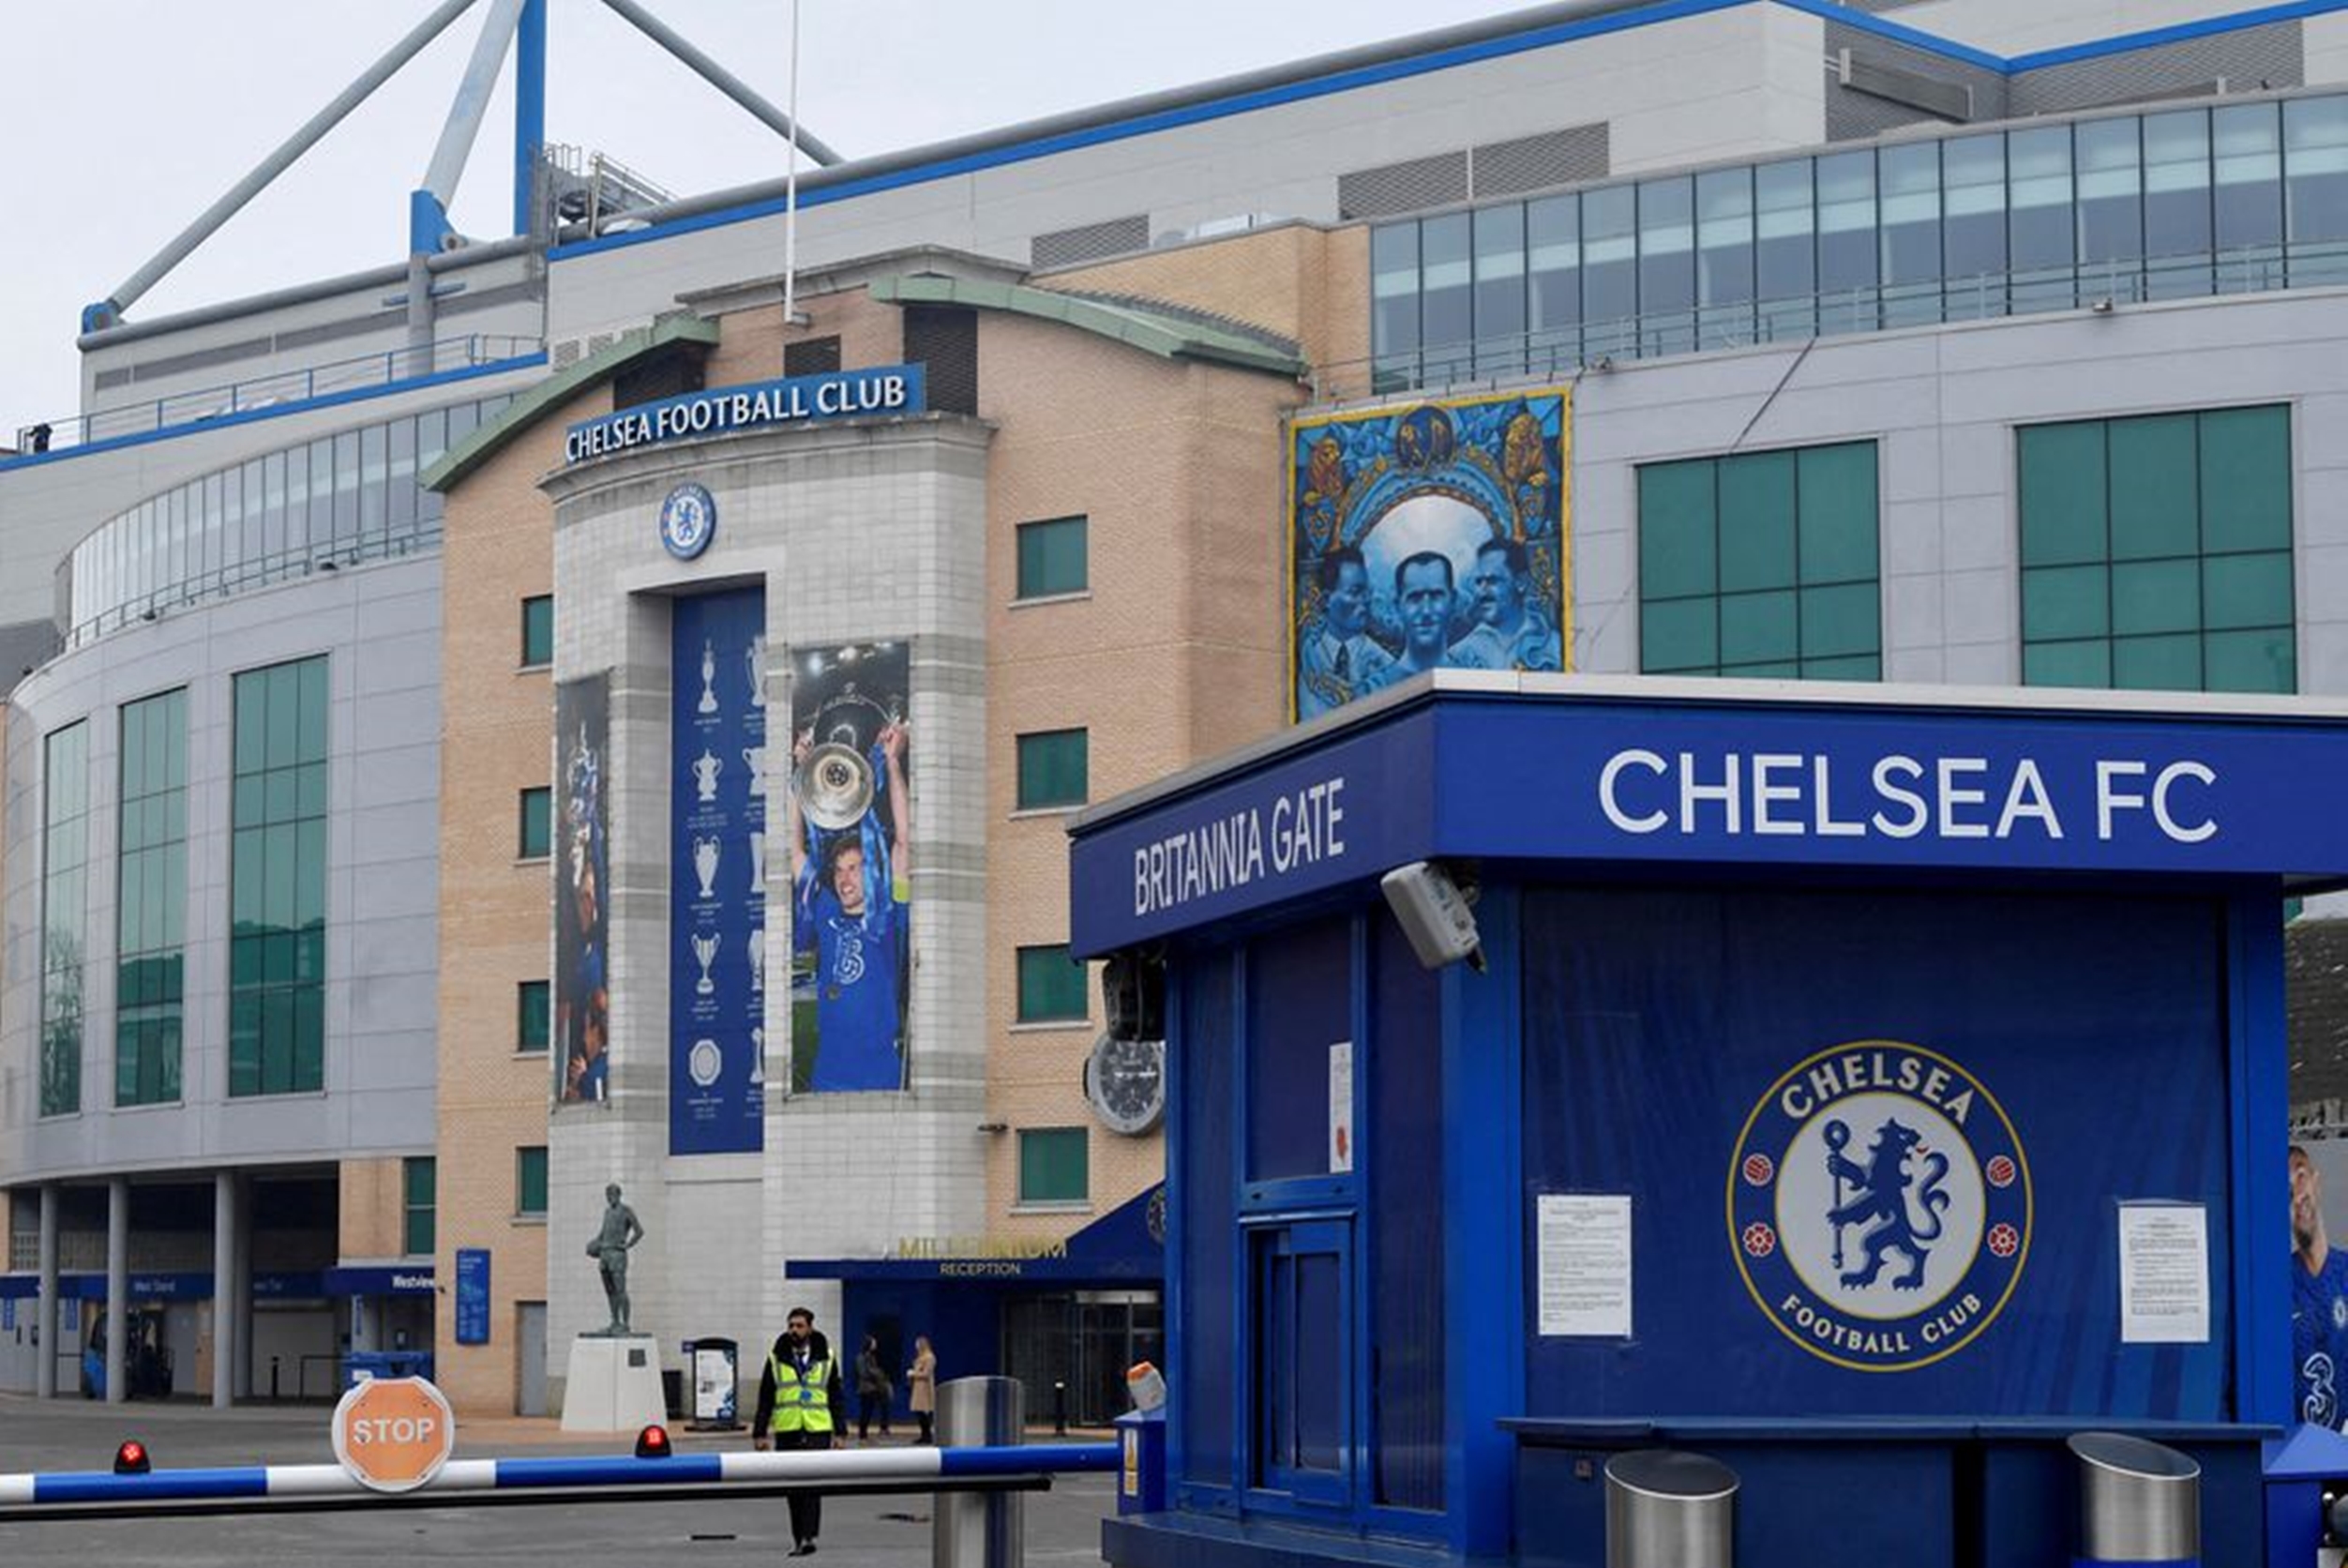 Chelsea to keep playing after Abramovich sanction, sale halted